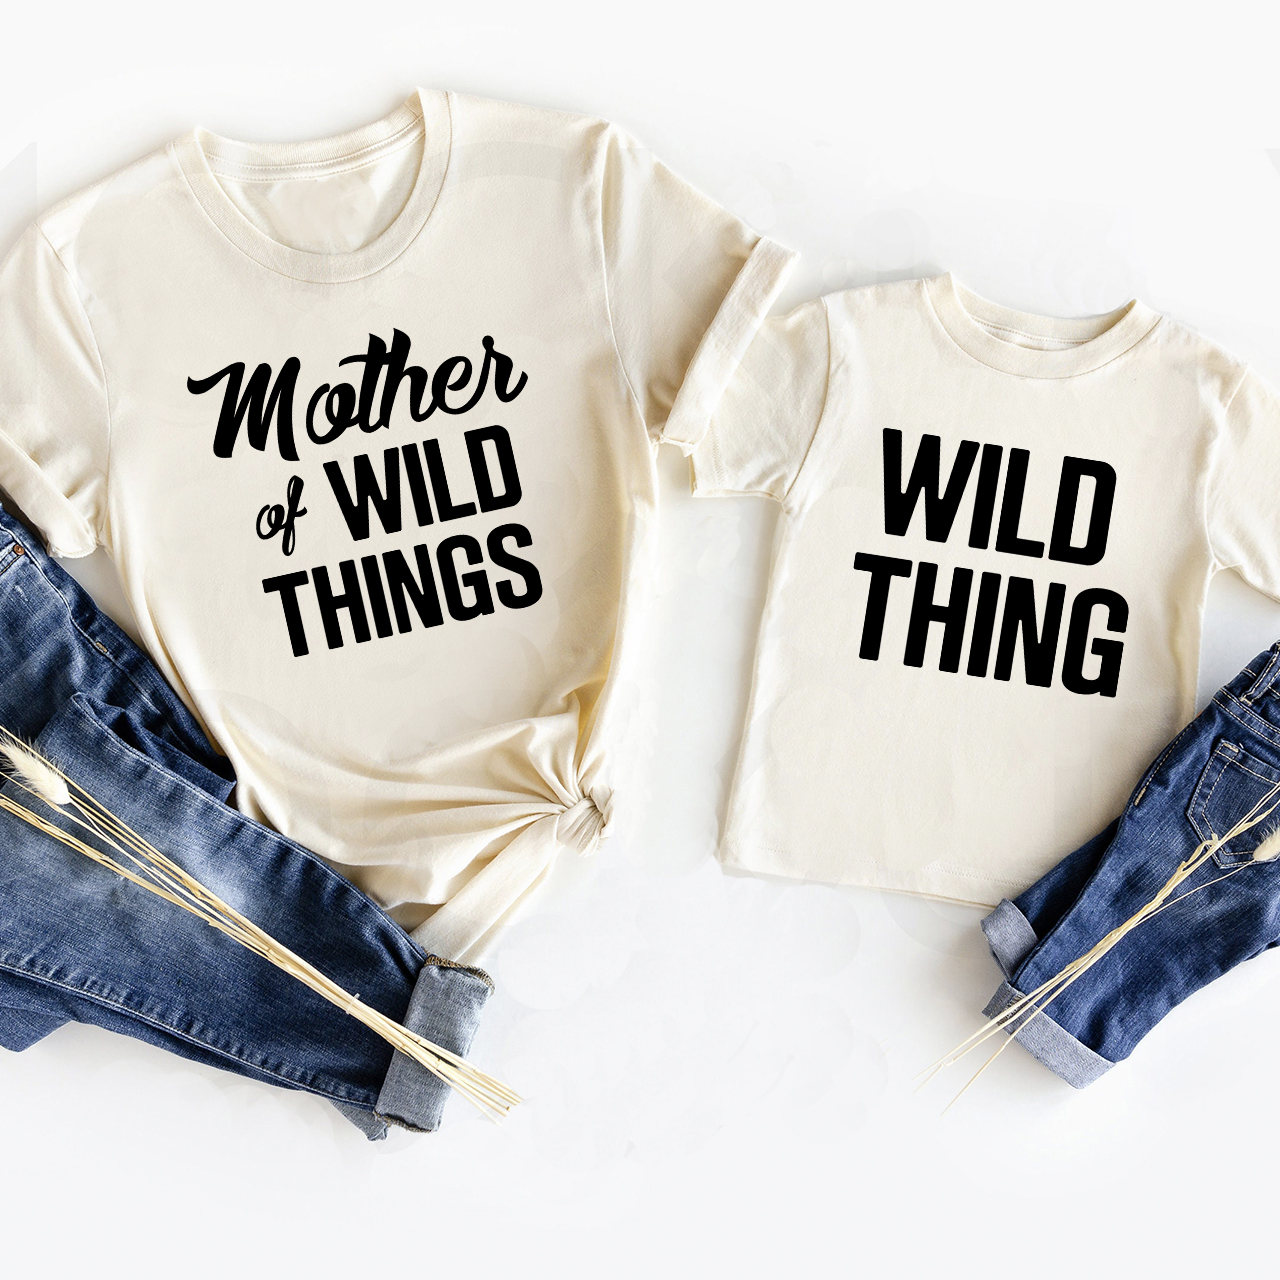 Mother Of WILD THINGS Matching Tees For Mother's Day